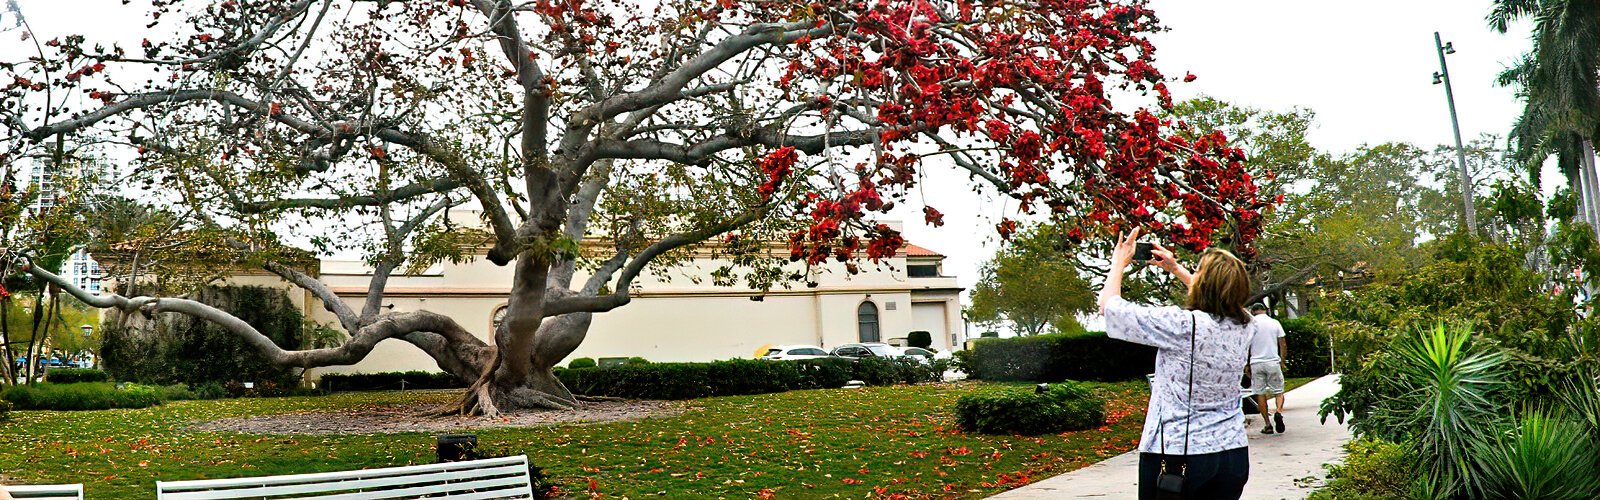 Planted at the southern end of the Museum of Fine Arts as a three-foot tree in 1965, the iconic Bombax ceiba tree blooms just once a year, in winter, attracting visitors with its magnificent red flowers.